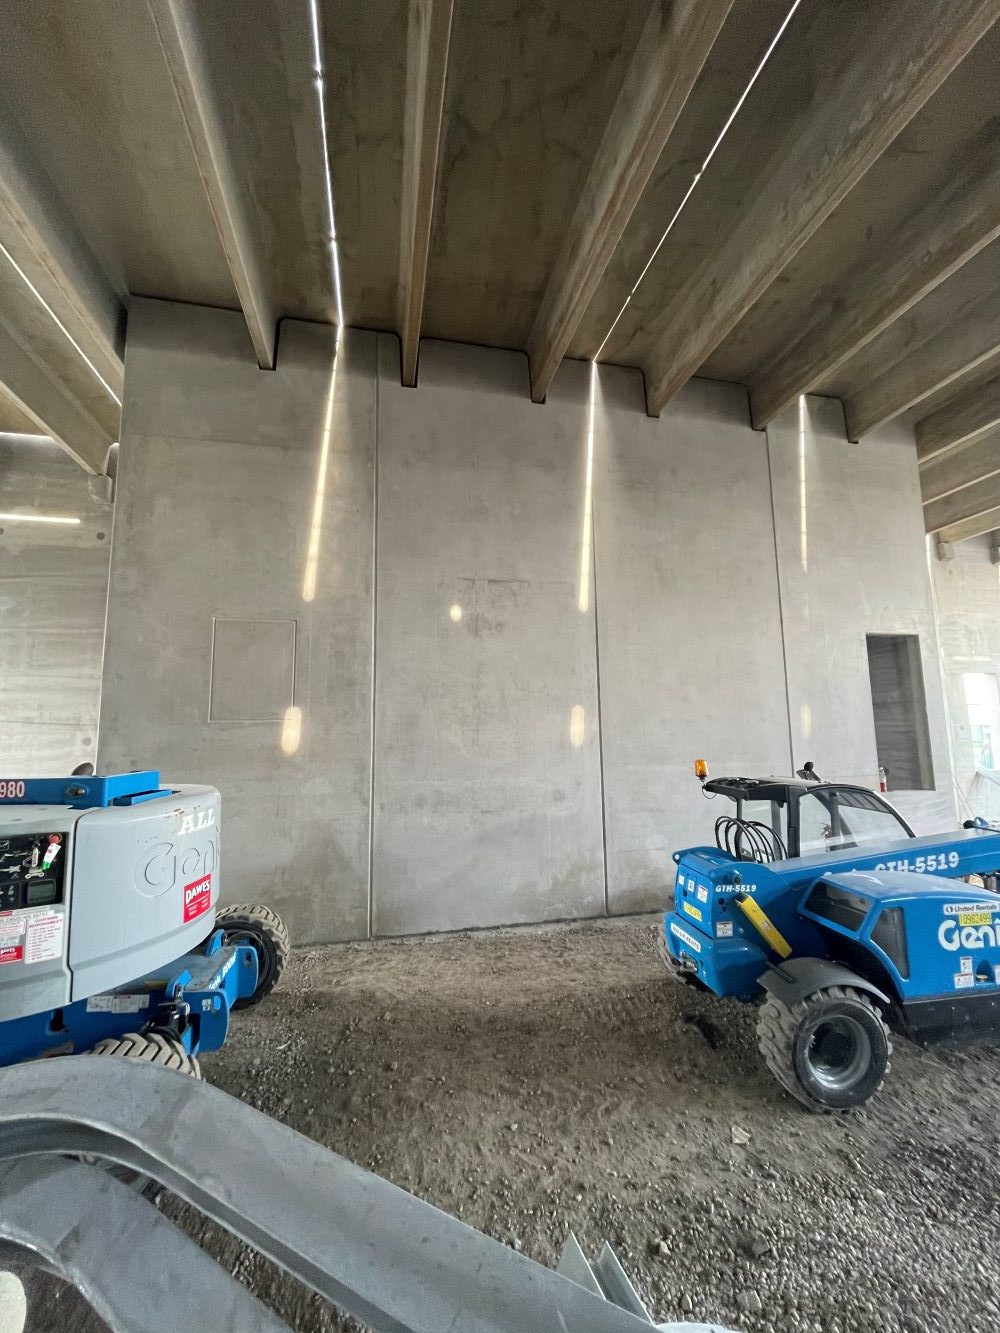 Concrete wall and ceiling beams